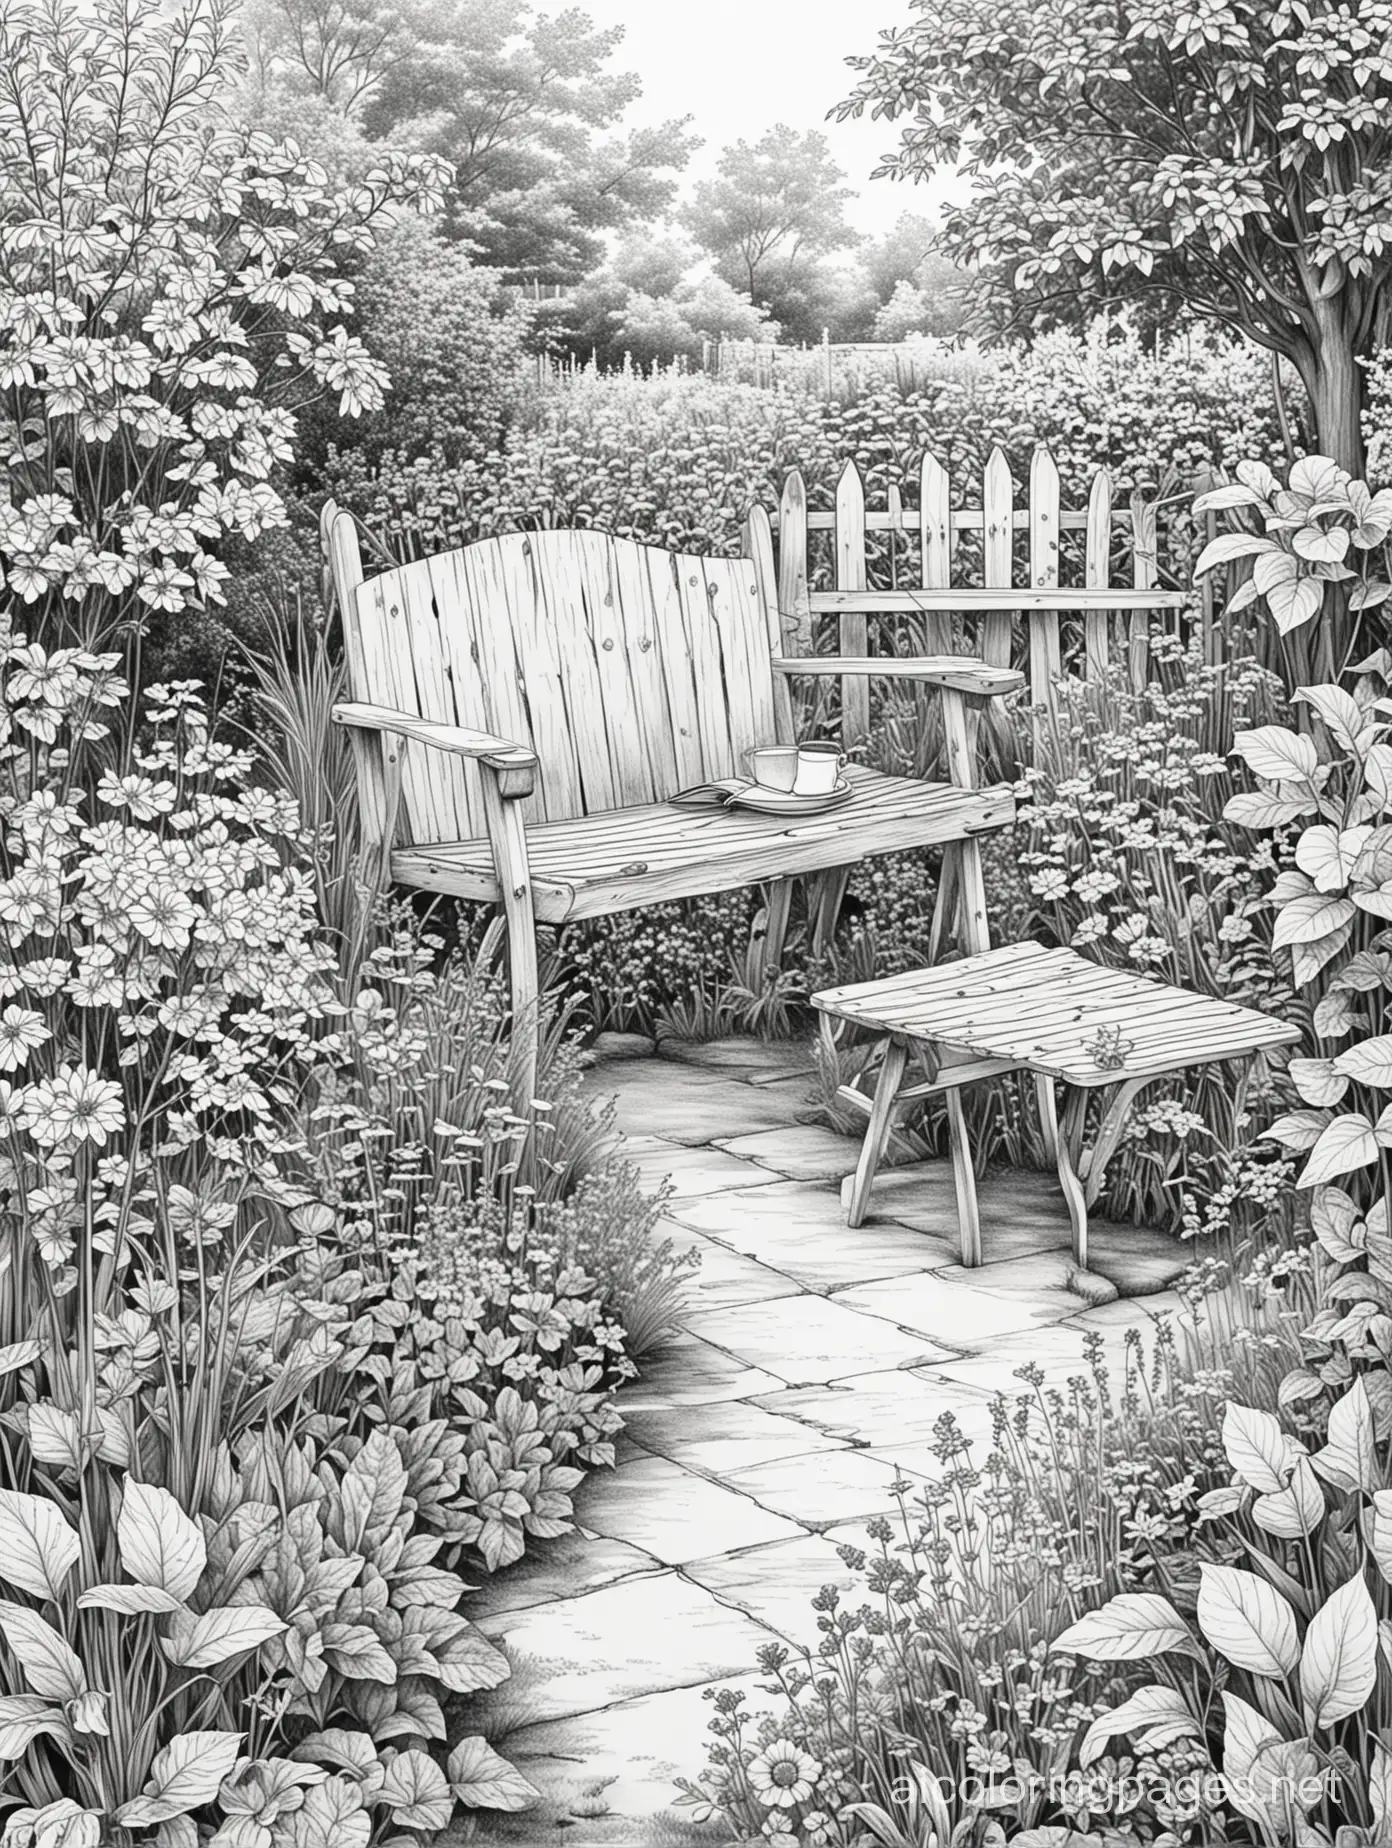 Create a picture for adult colouring in black and white only.  The theme of the picture: British garden. gardening. Style: sketching, ink, line drawings. the picture shows garden furniture standing in the garden. The detail of the drawing is medium.  Ratio 3:4, Coloring Page, black and white, line art, white background, Simplicity, Ample White Space. The background of the coloring page is plain white to make it easy for young children to color within the lines. The outlines of all the subjects are easy to distinguish, making it simple for kids to color without too much difficulty